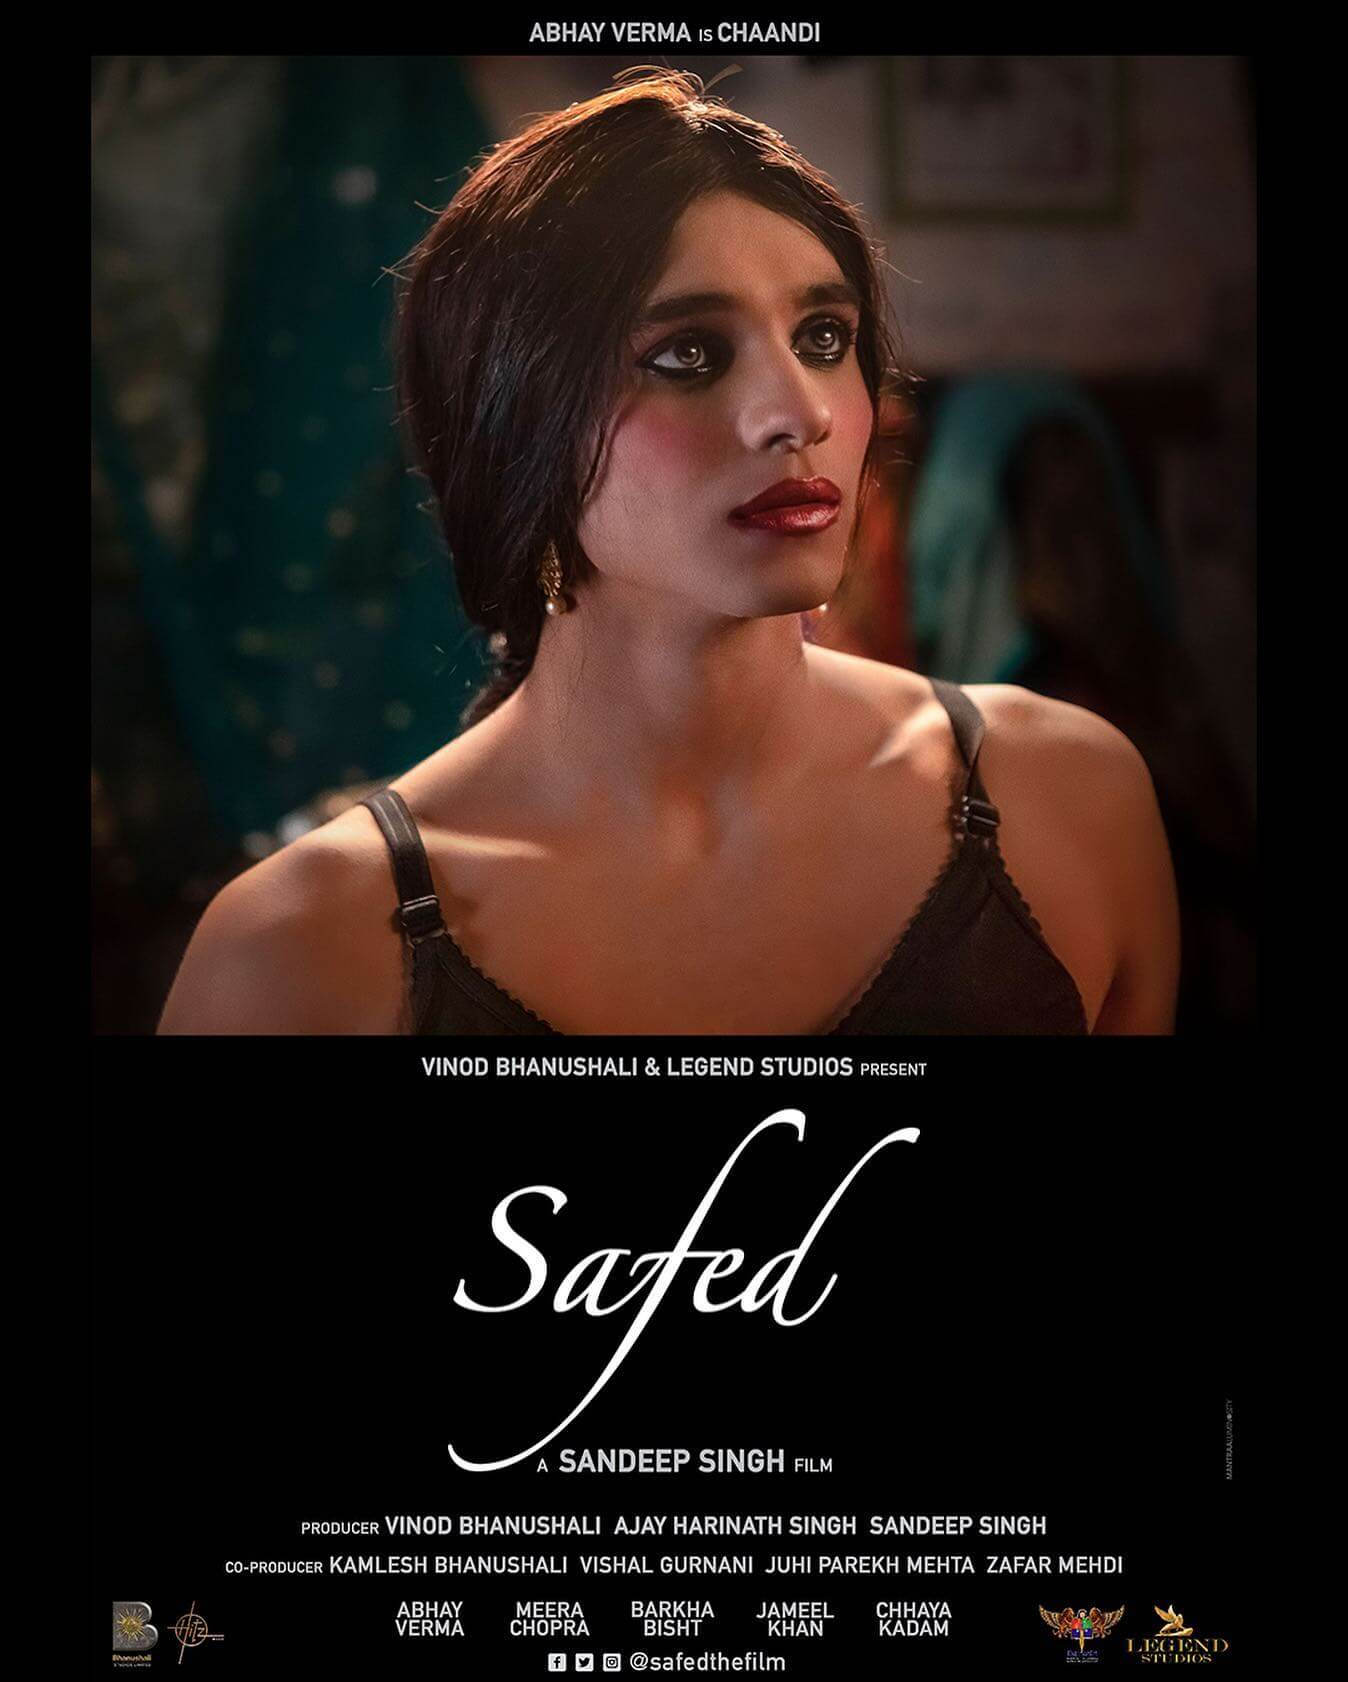 Safed Movie (2022) Cast, Roles, Trailer, Story, Release Date, Poster